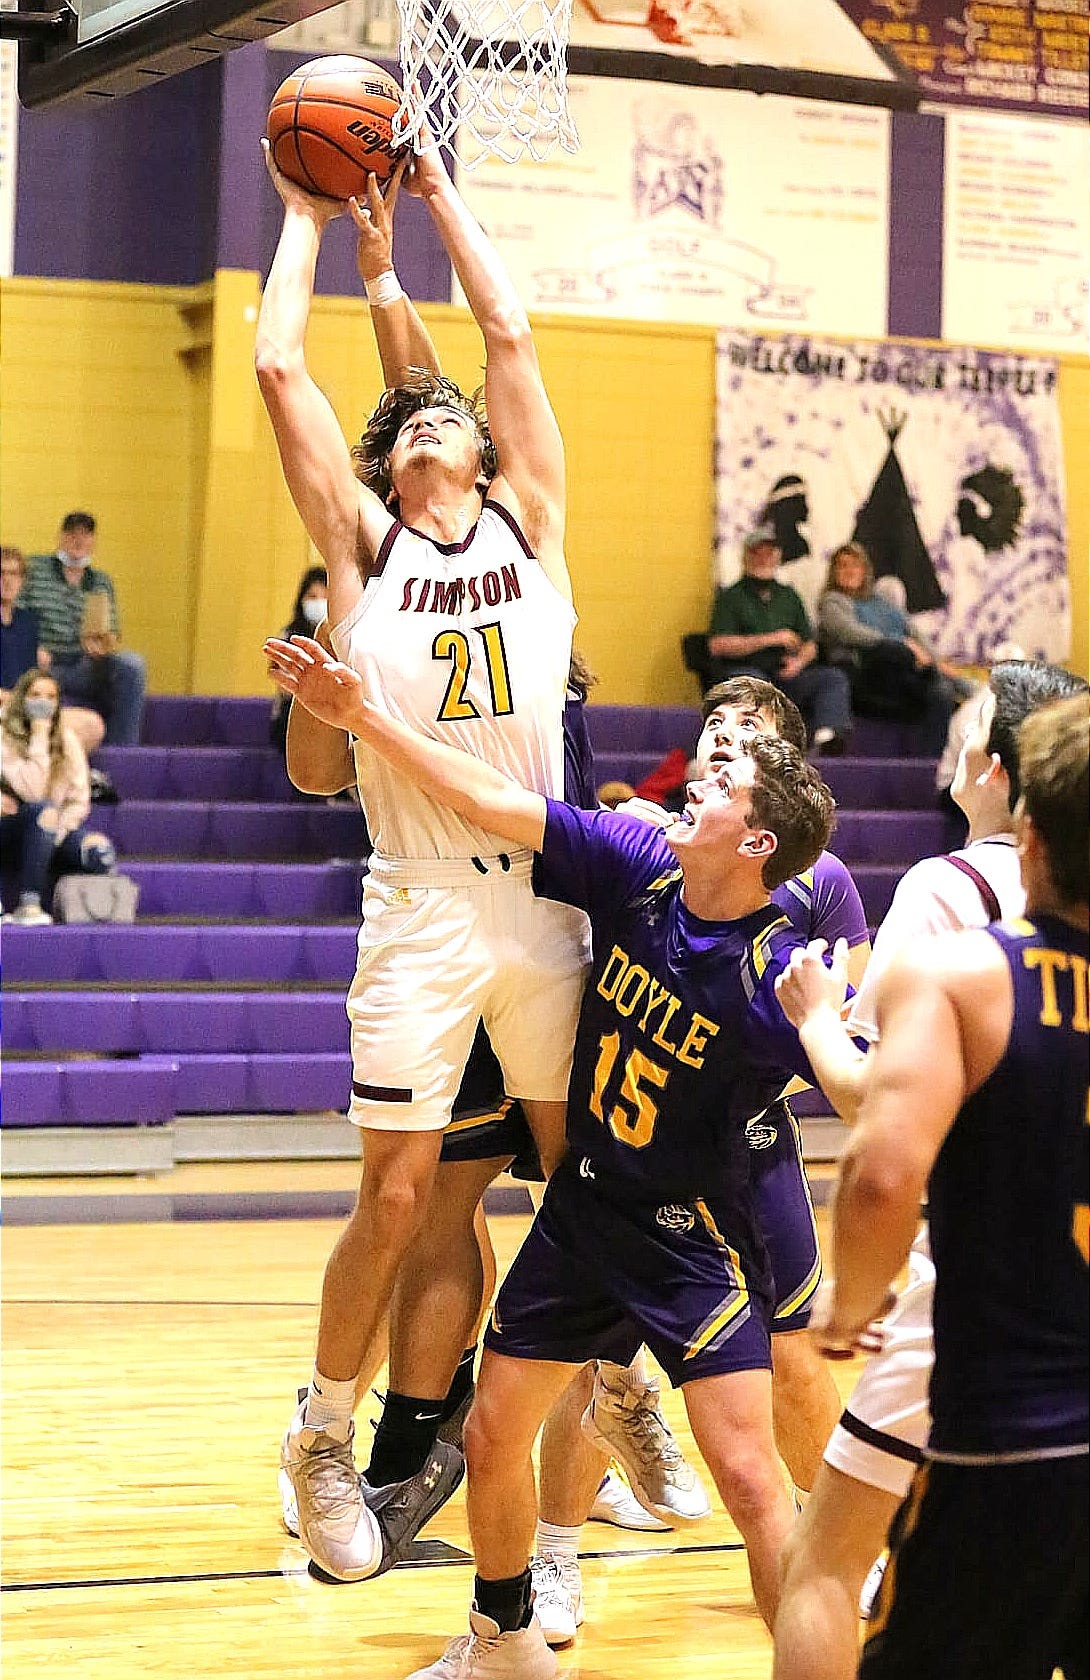 Simpson's Rhett Petre (21) scored 23 and 13 points in two games early this week for the Broncos, both of which were victories.